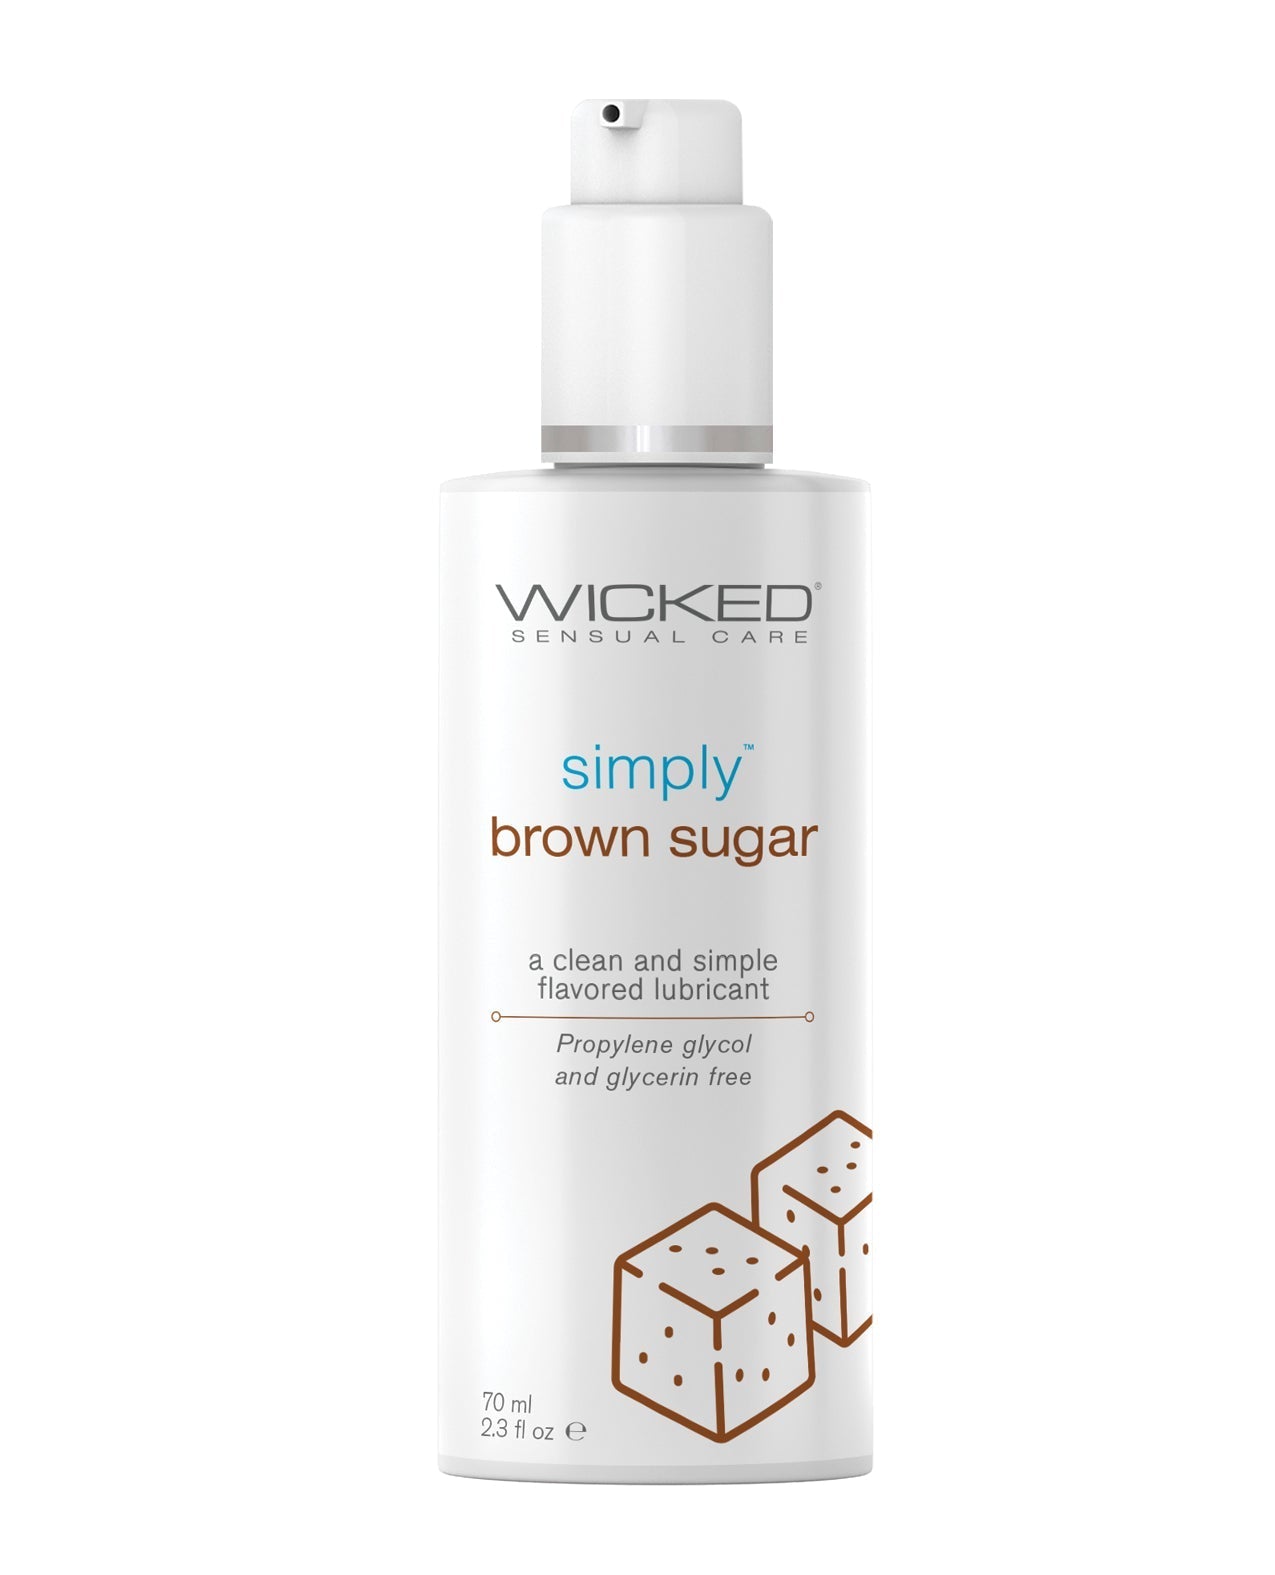 Wicked Sensual Care Simply Water Based Lubricant - 2.3 oz Brown Sugar